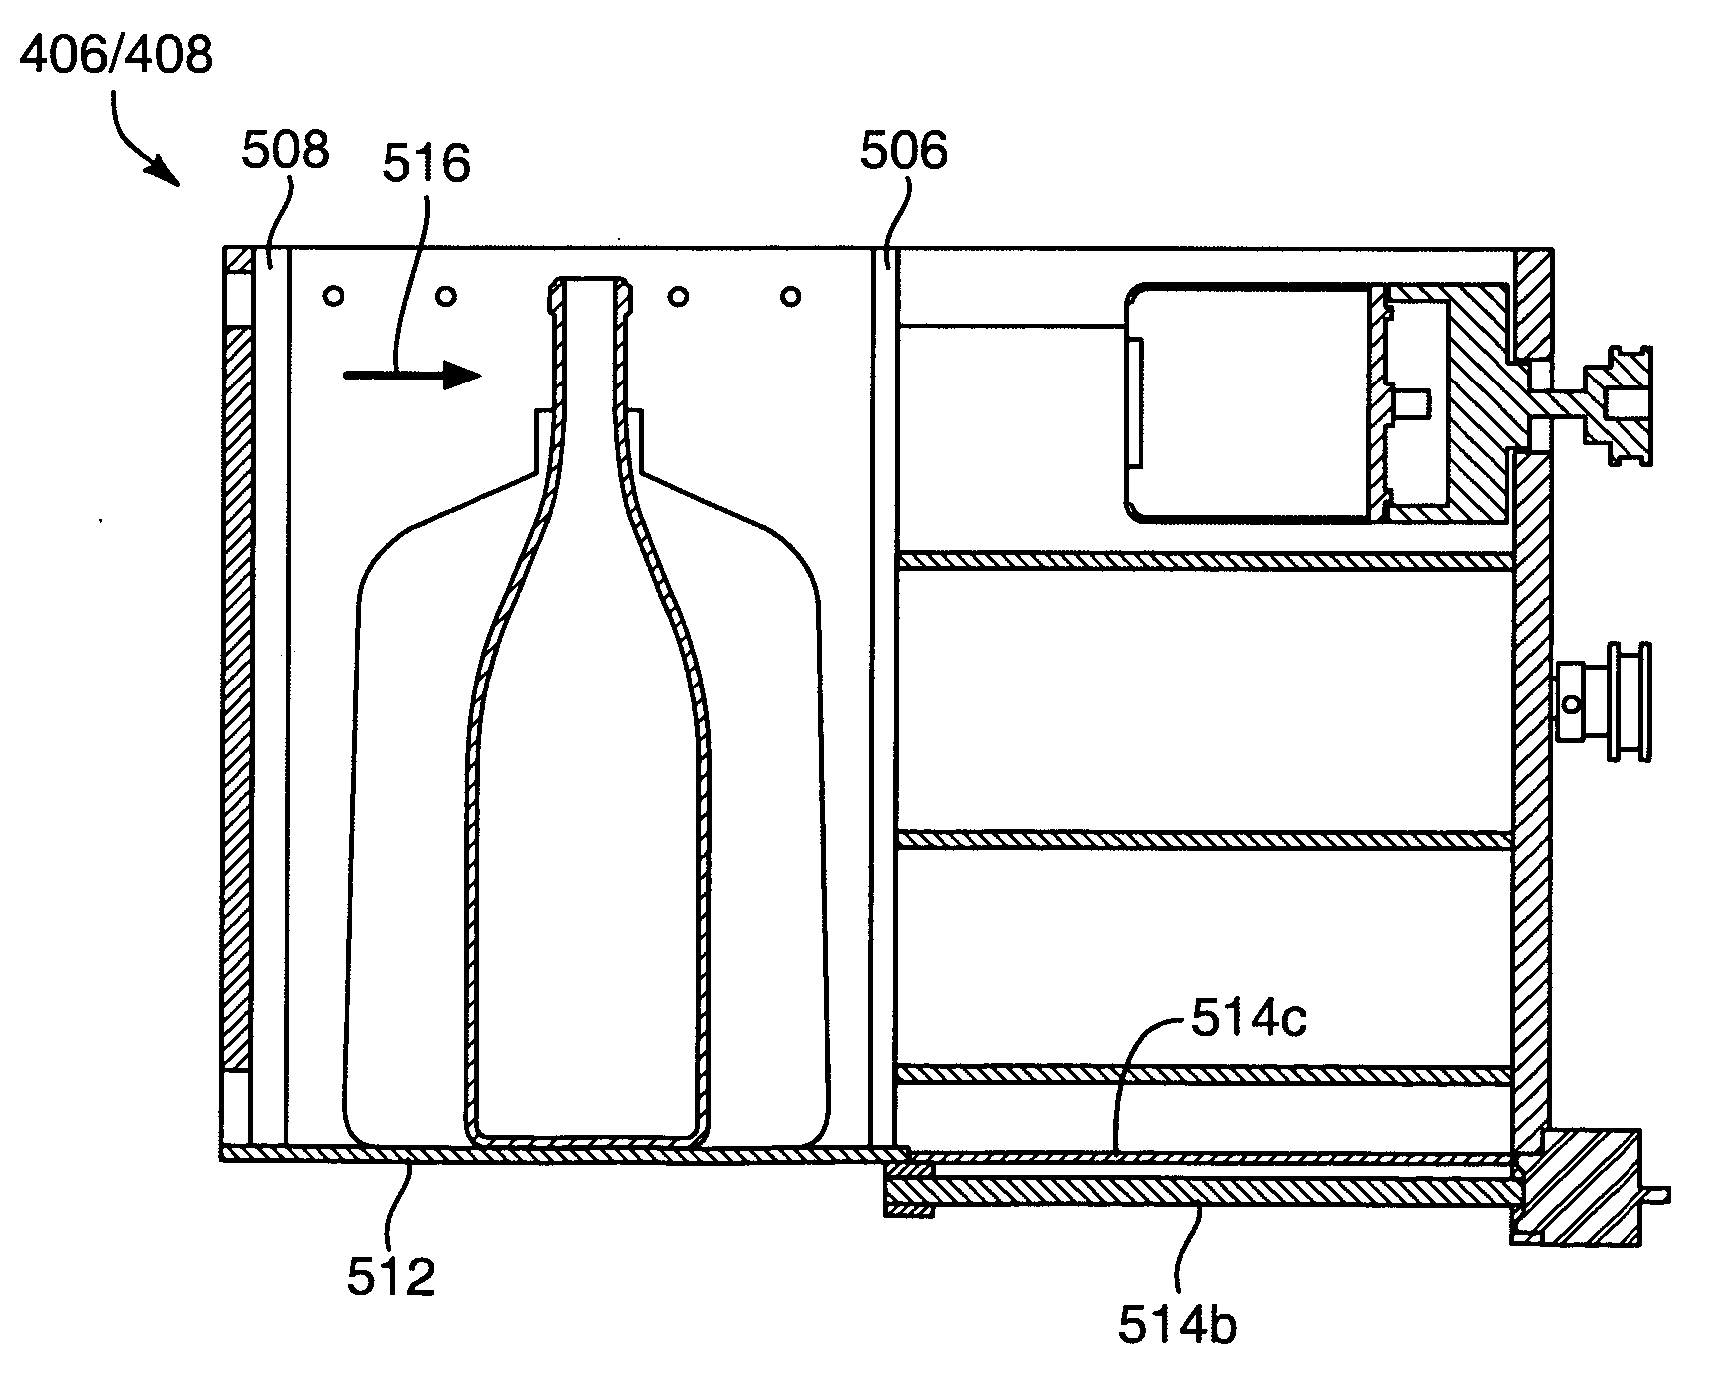 Apparatus, system, and method for condensing, separating and storing recyclable material